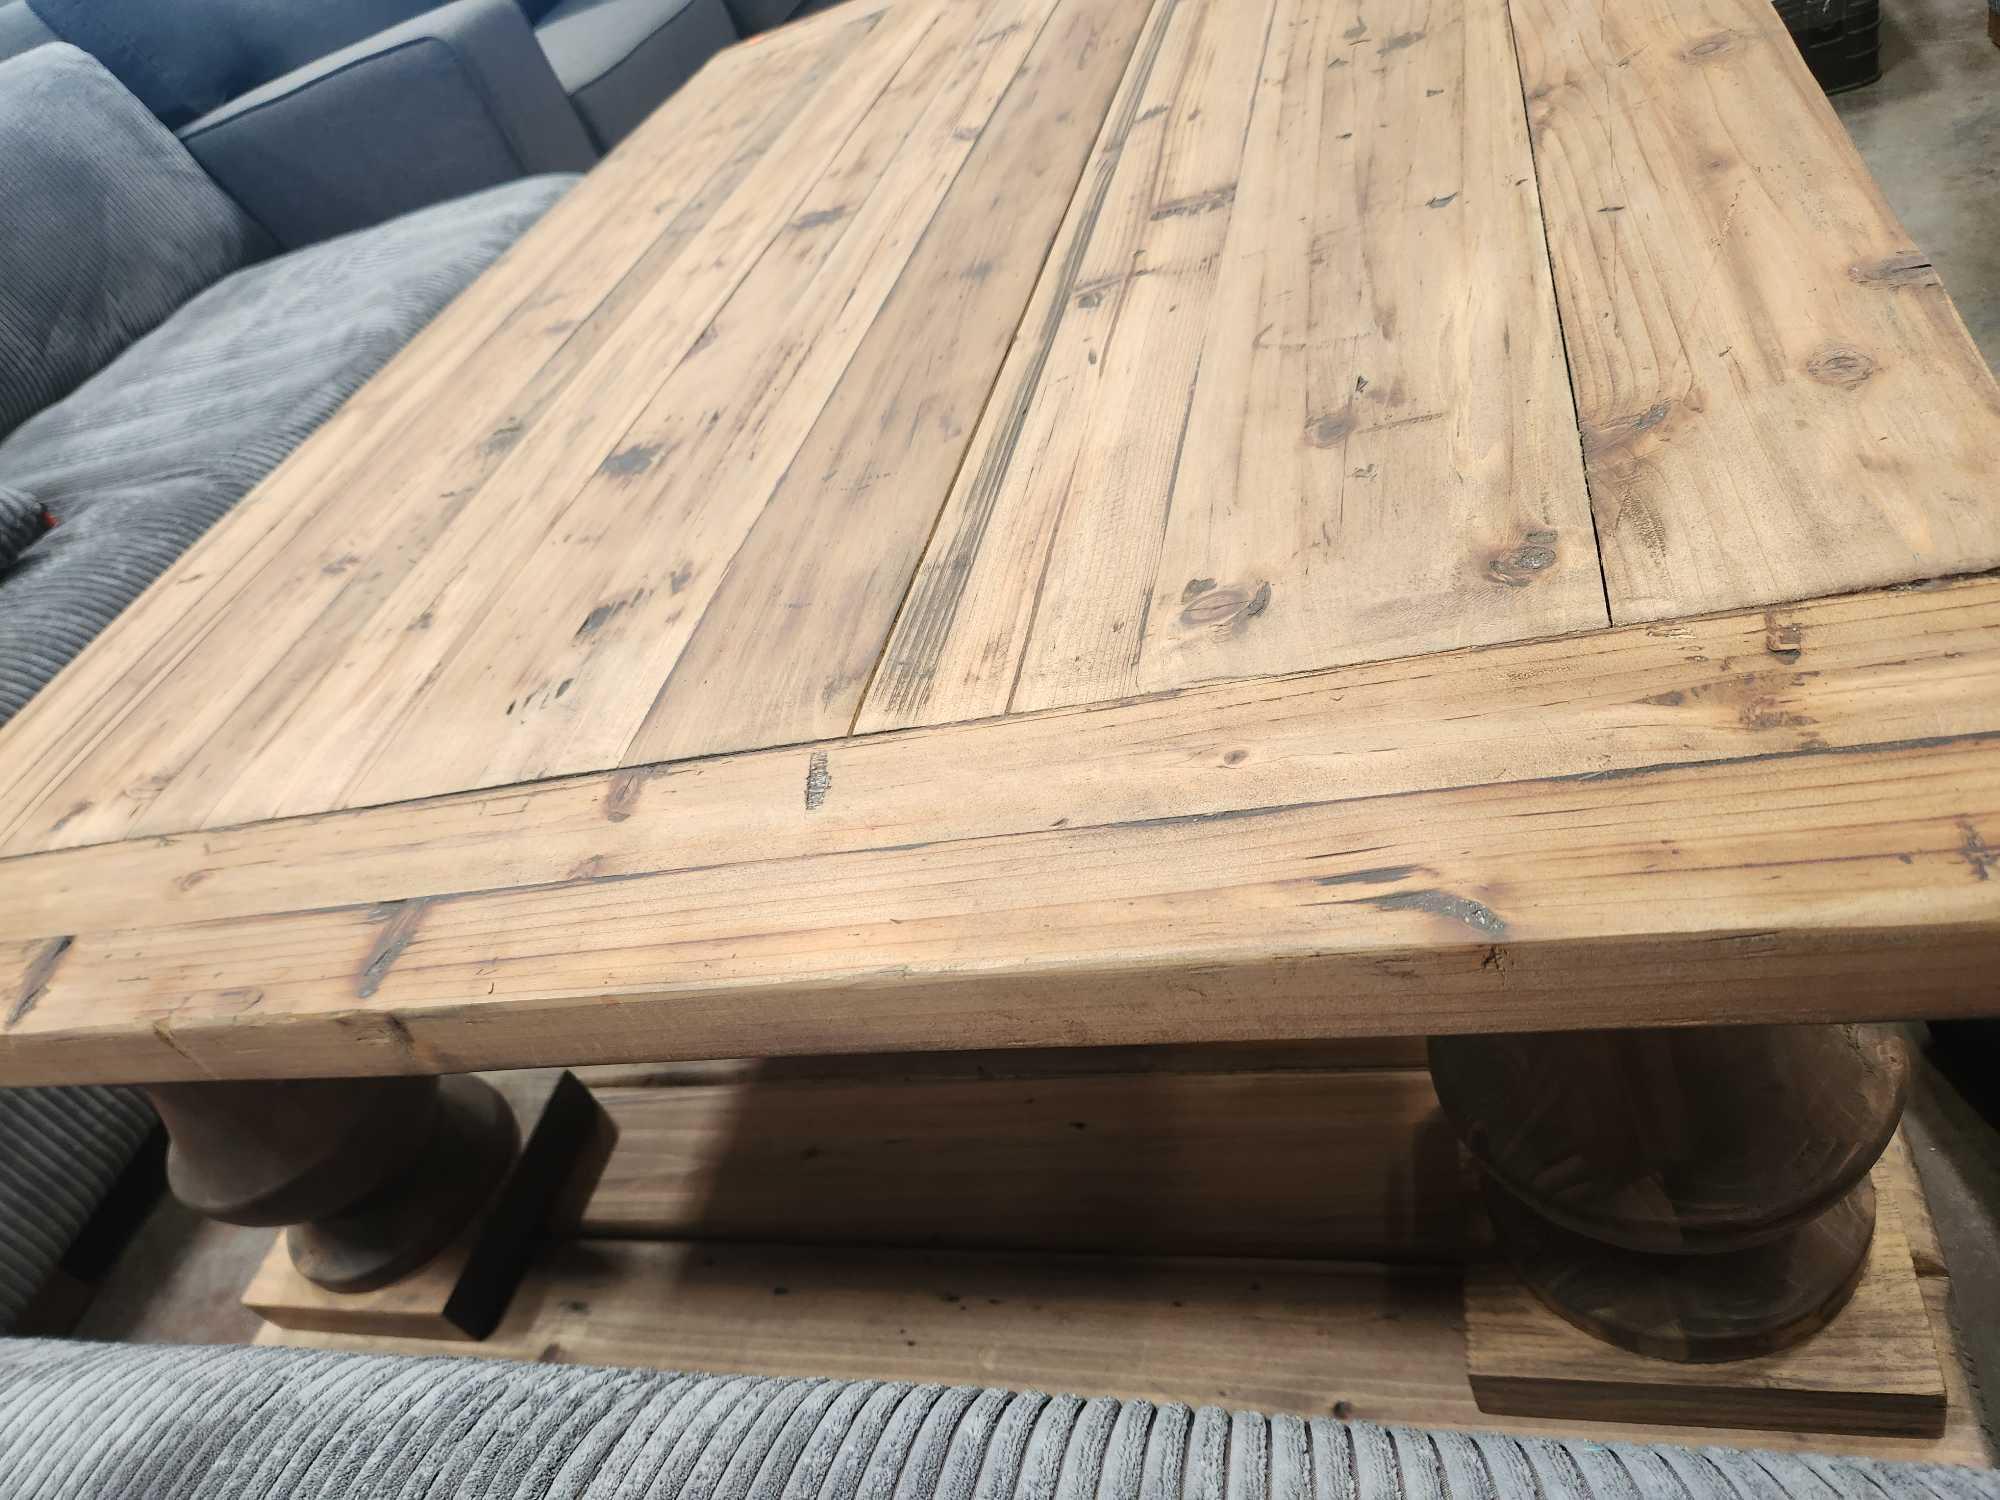 Wooden Coffee Table*DAMAGED*